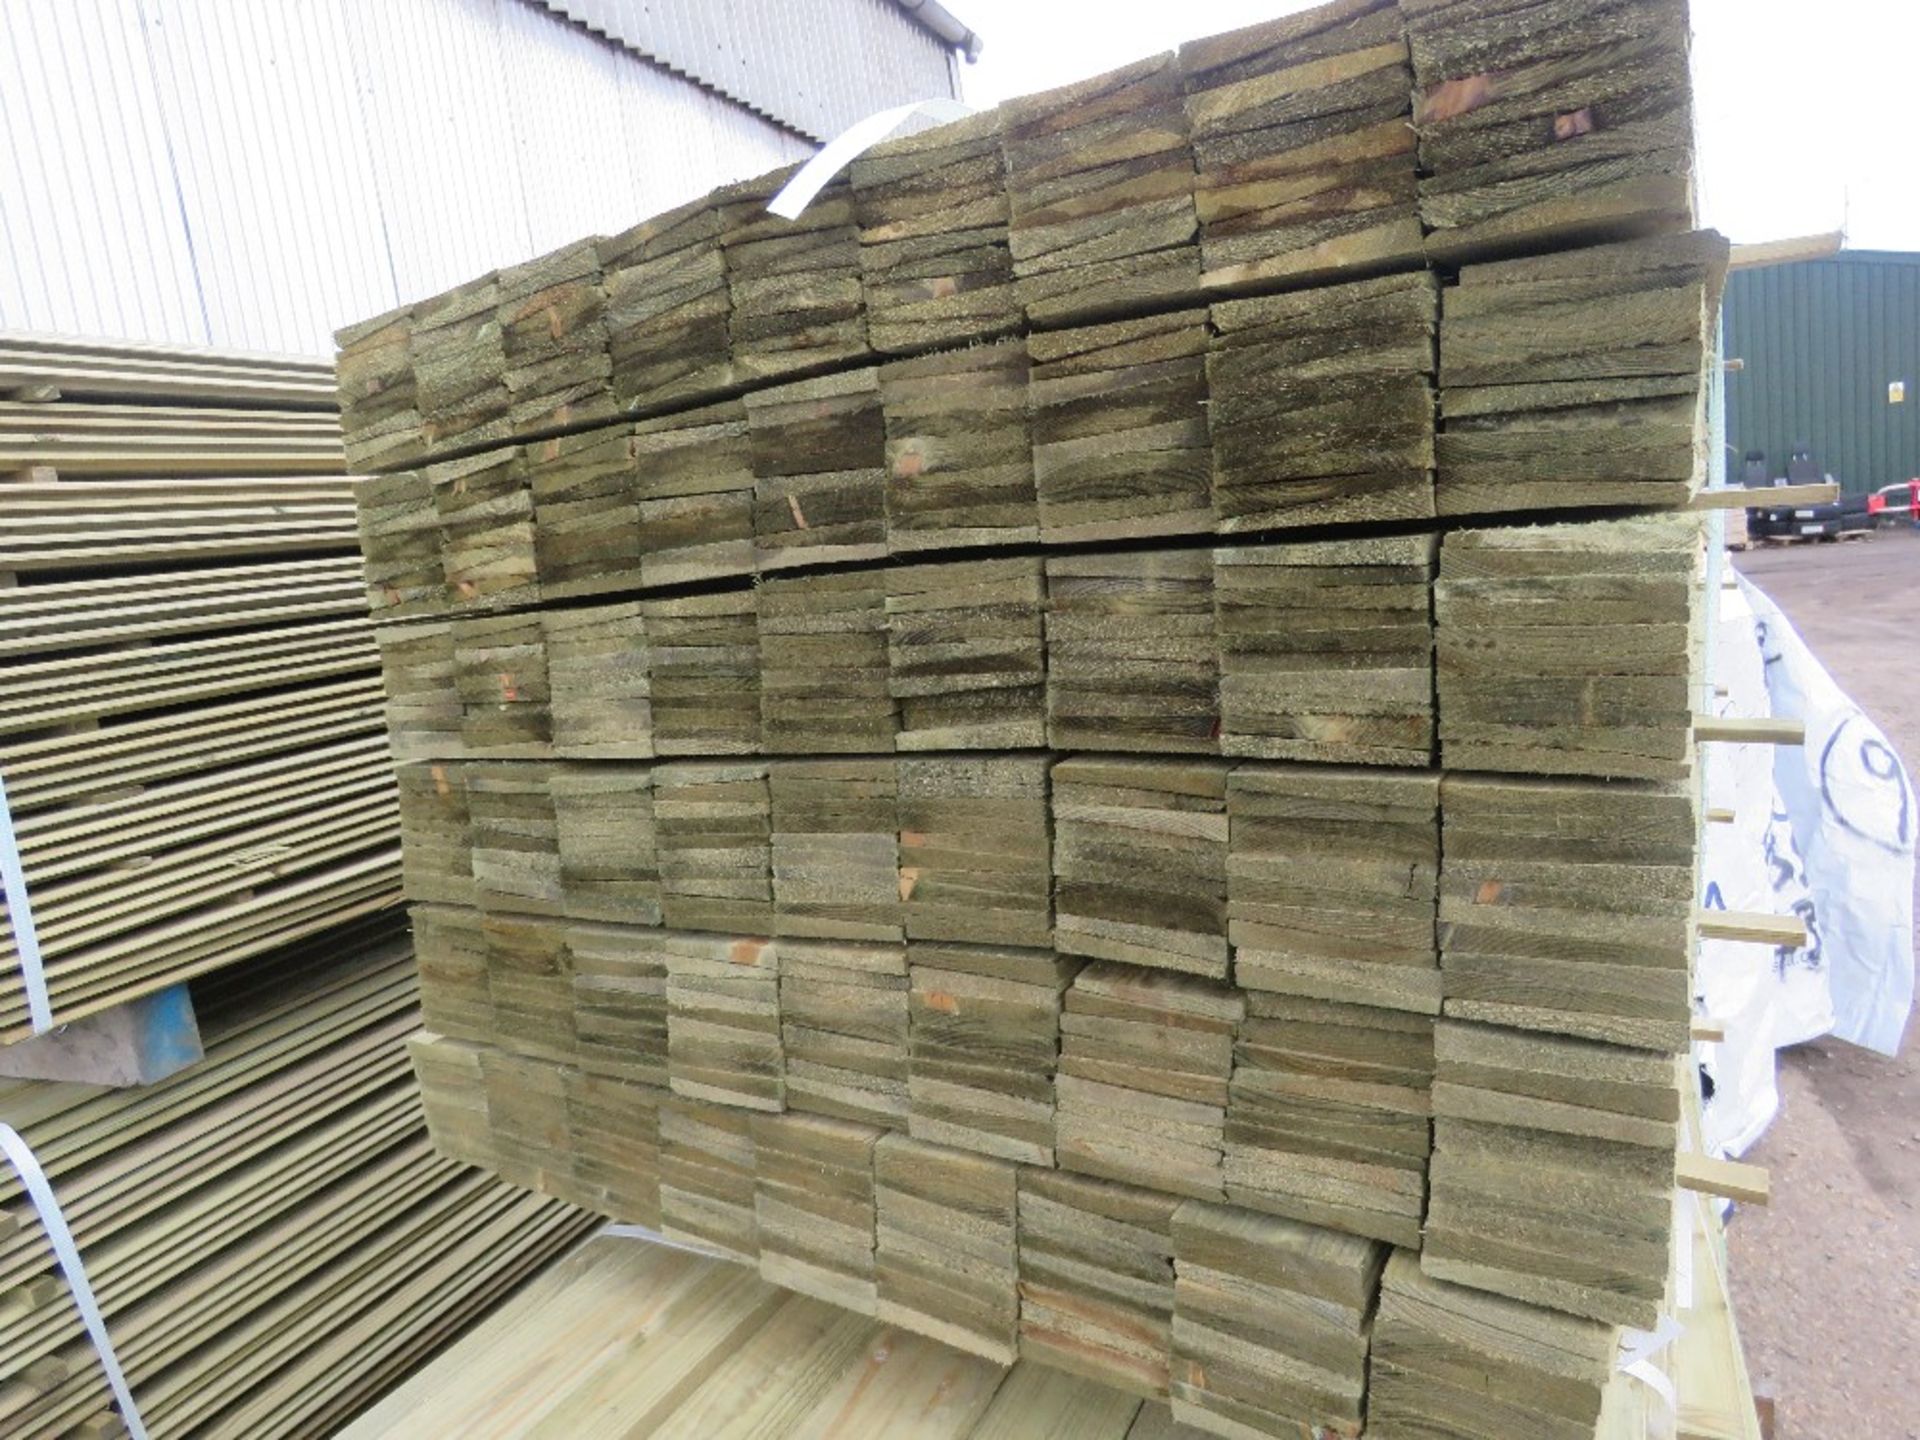 PACK OF TREATED FEATHER EDGE TIMBER FENCE CLADDING, 1.2M LENGTH X 105MM WIDTH APPROX. - Image 2 of 3